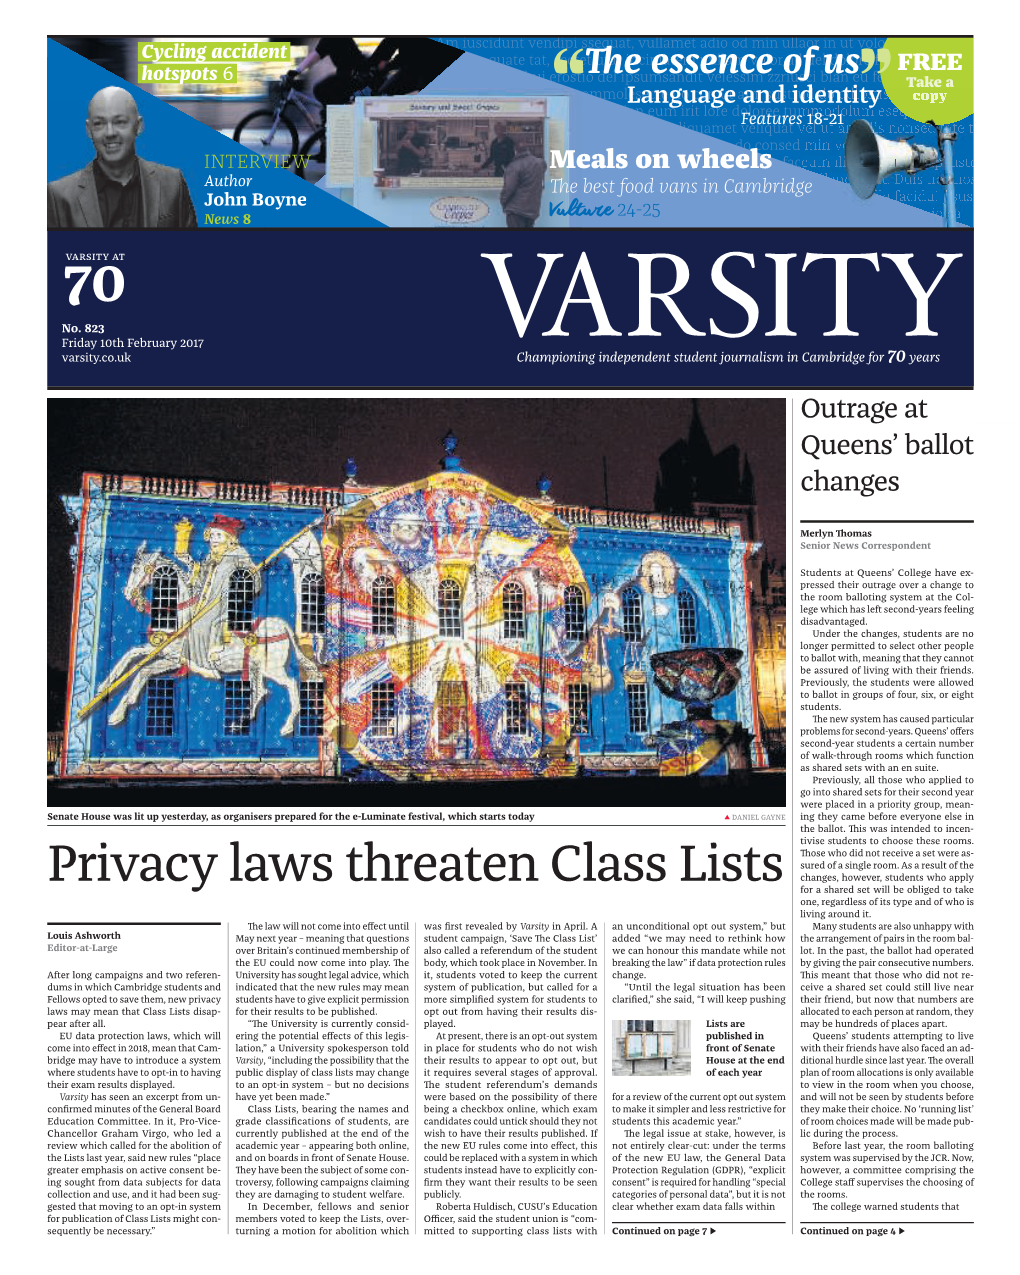 Privacy Laws Threaten Class Lists